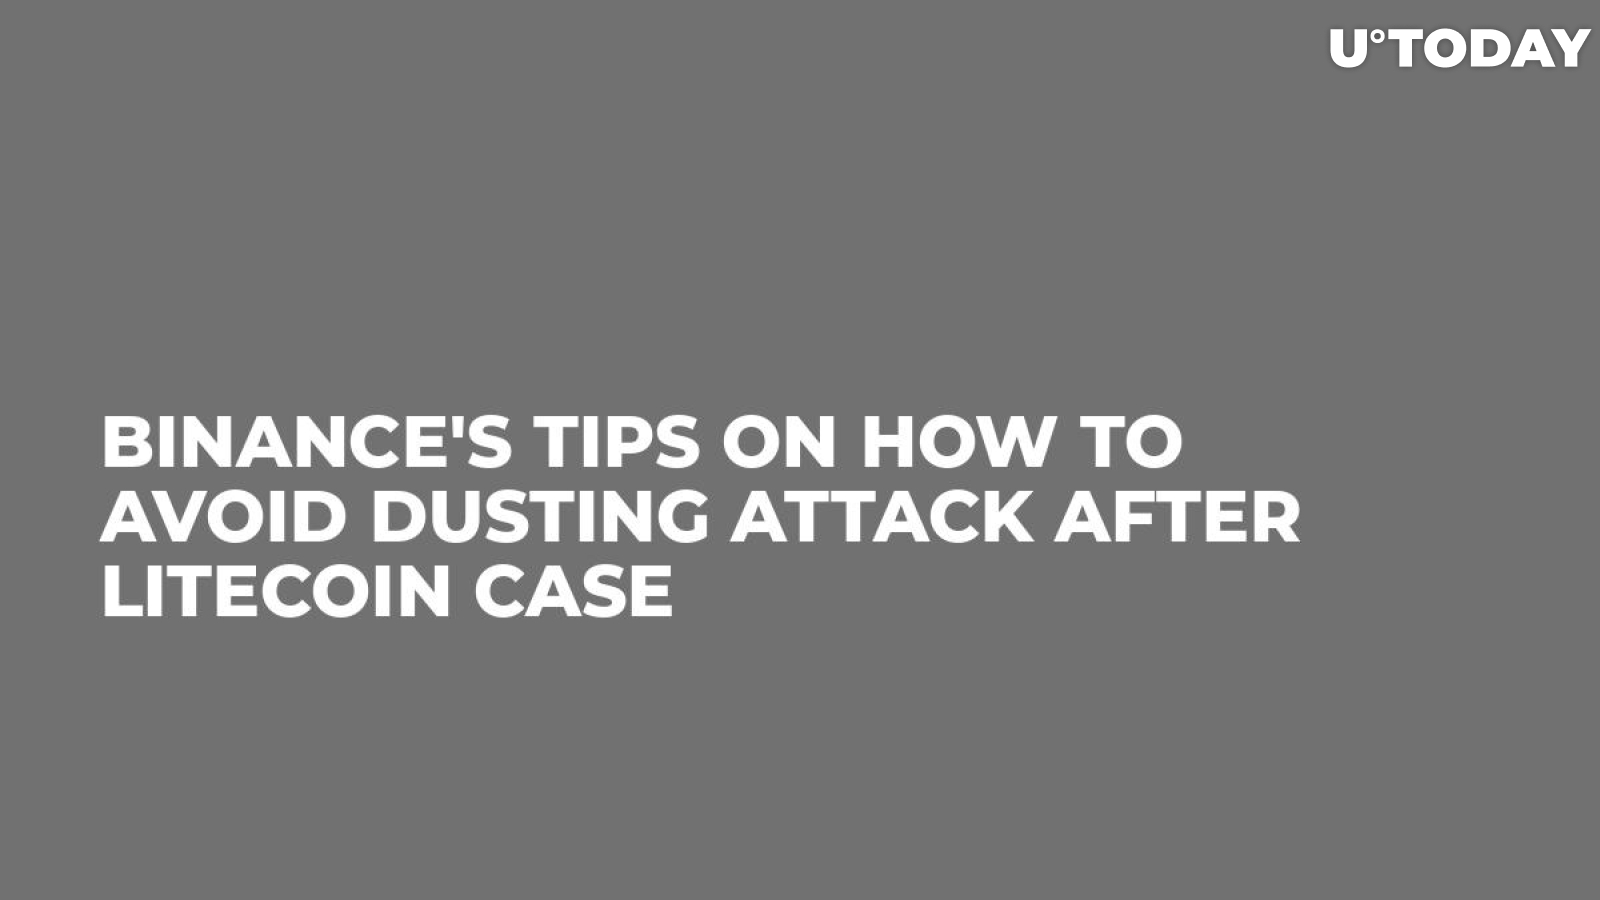 Binance's Tips on How to Avoid Dusting Attack After Litecoin Case